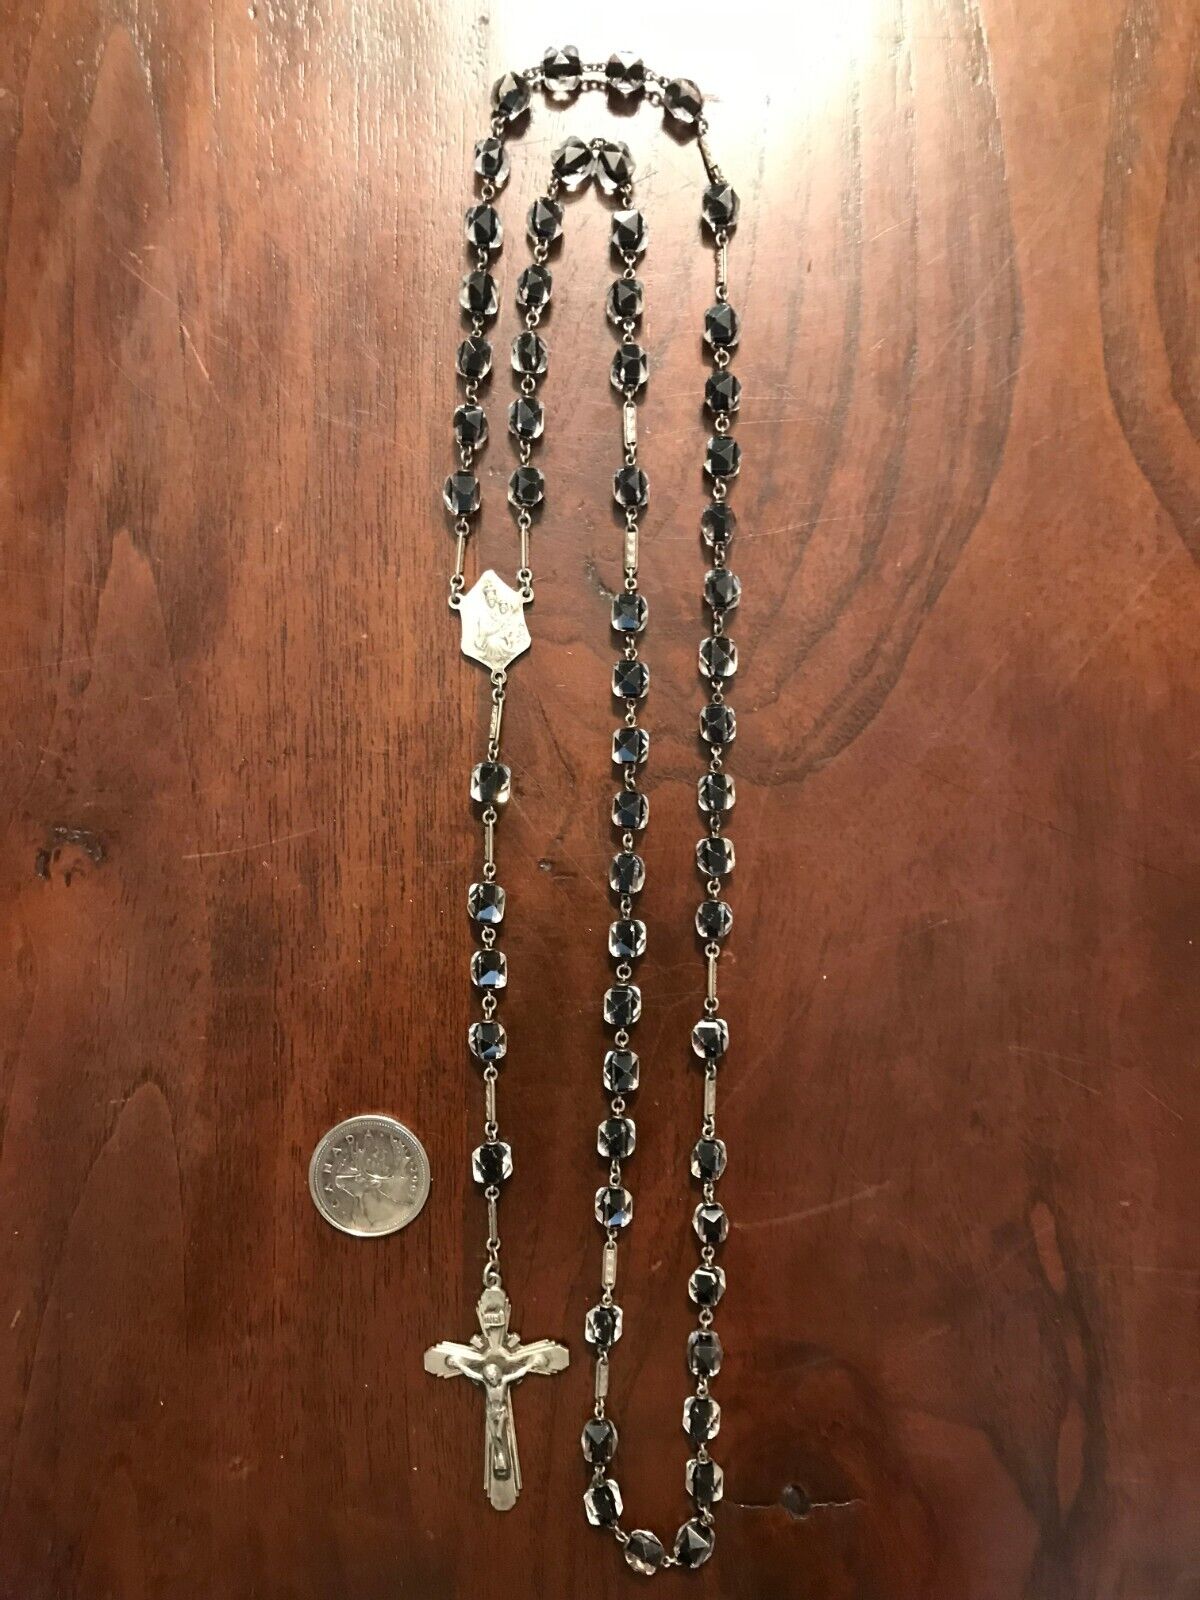 ANTIQUE ROSARY FACETED BEADS,GLORIA STERLING MEDAL & CRUCIFIX 22 inches